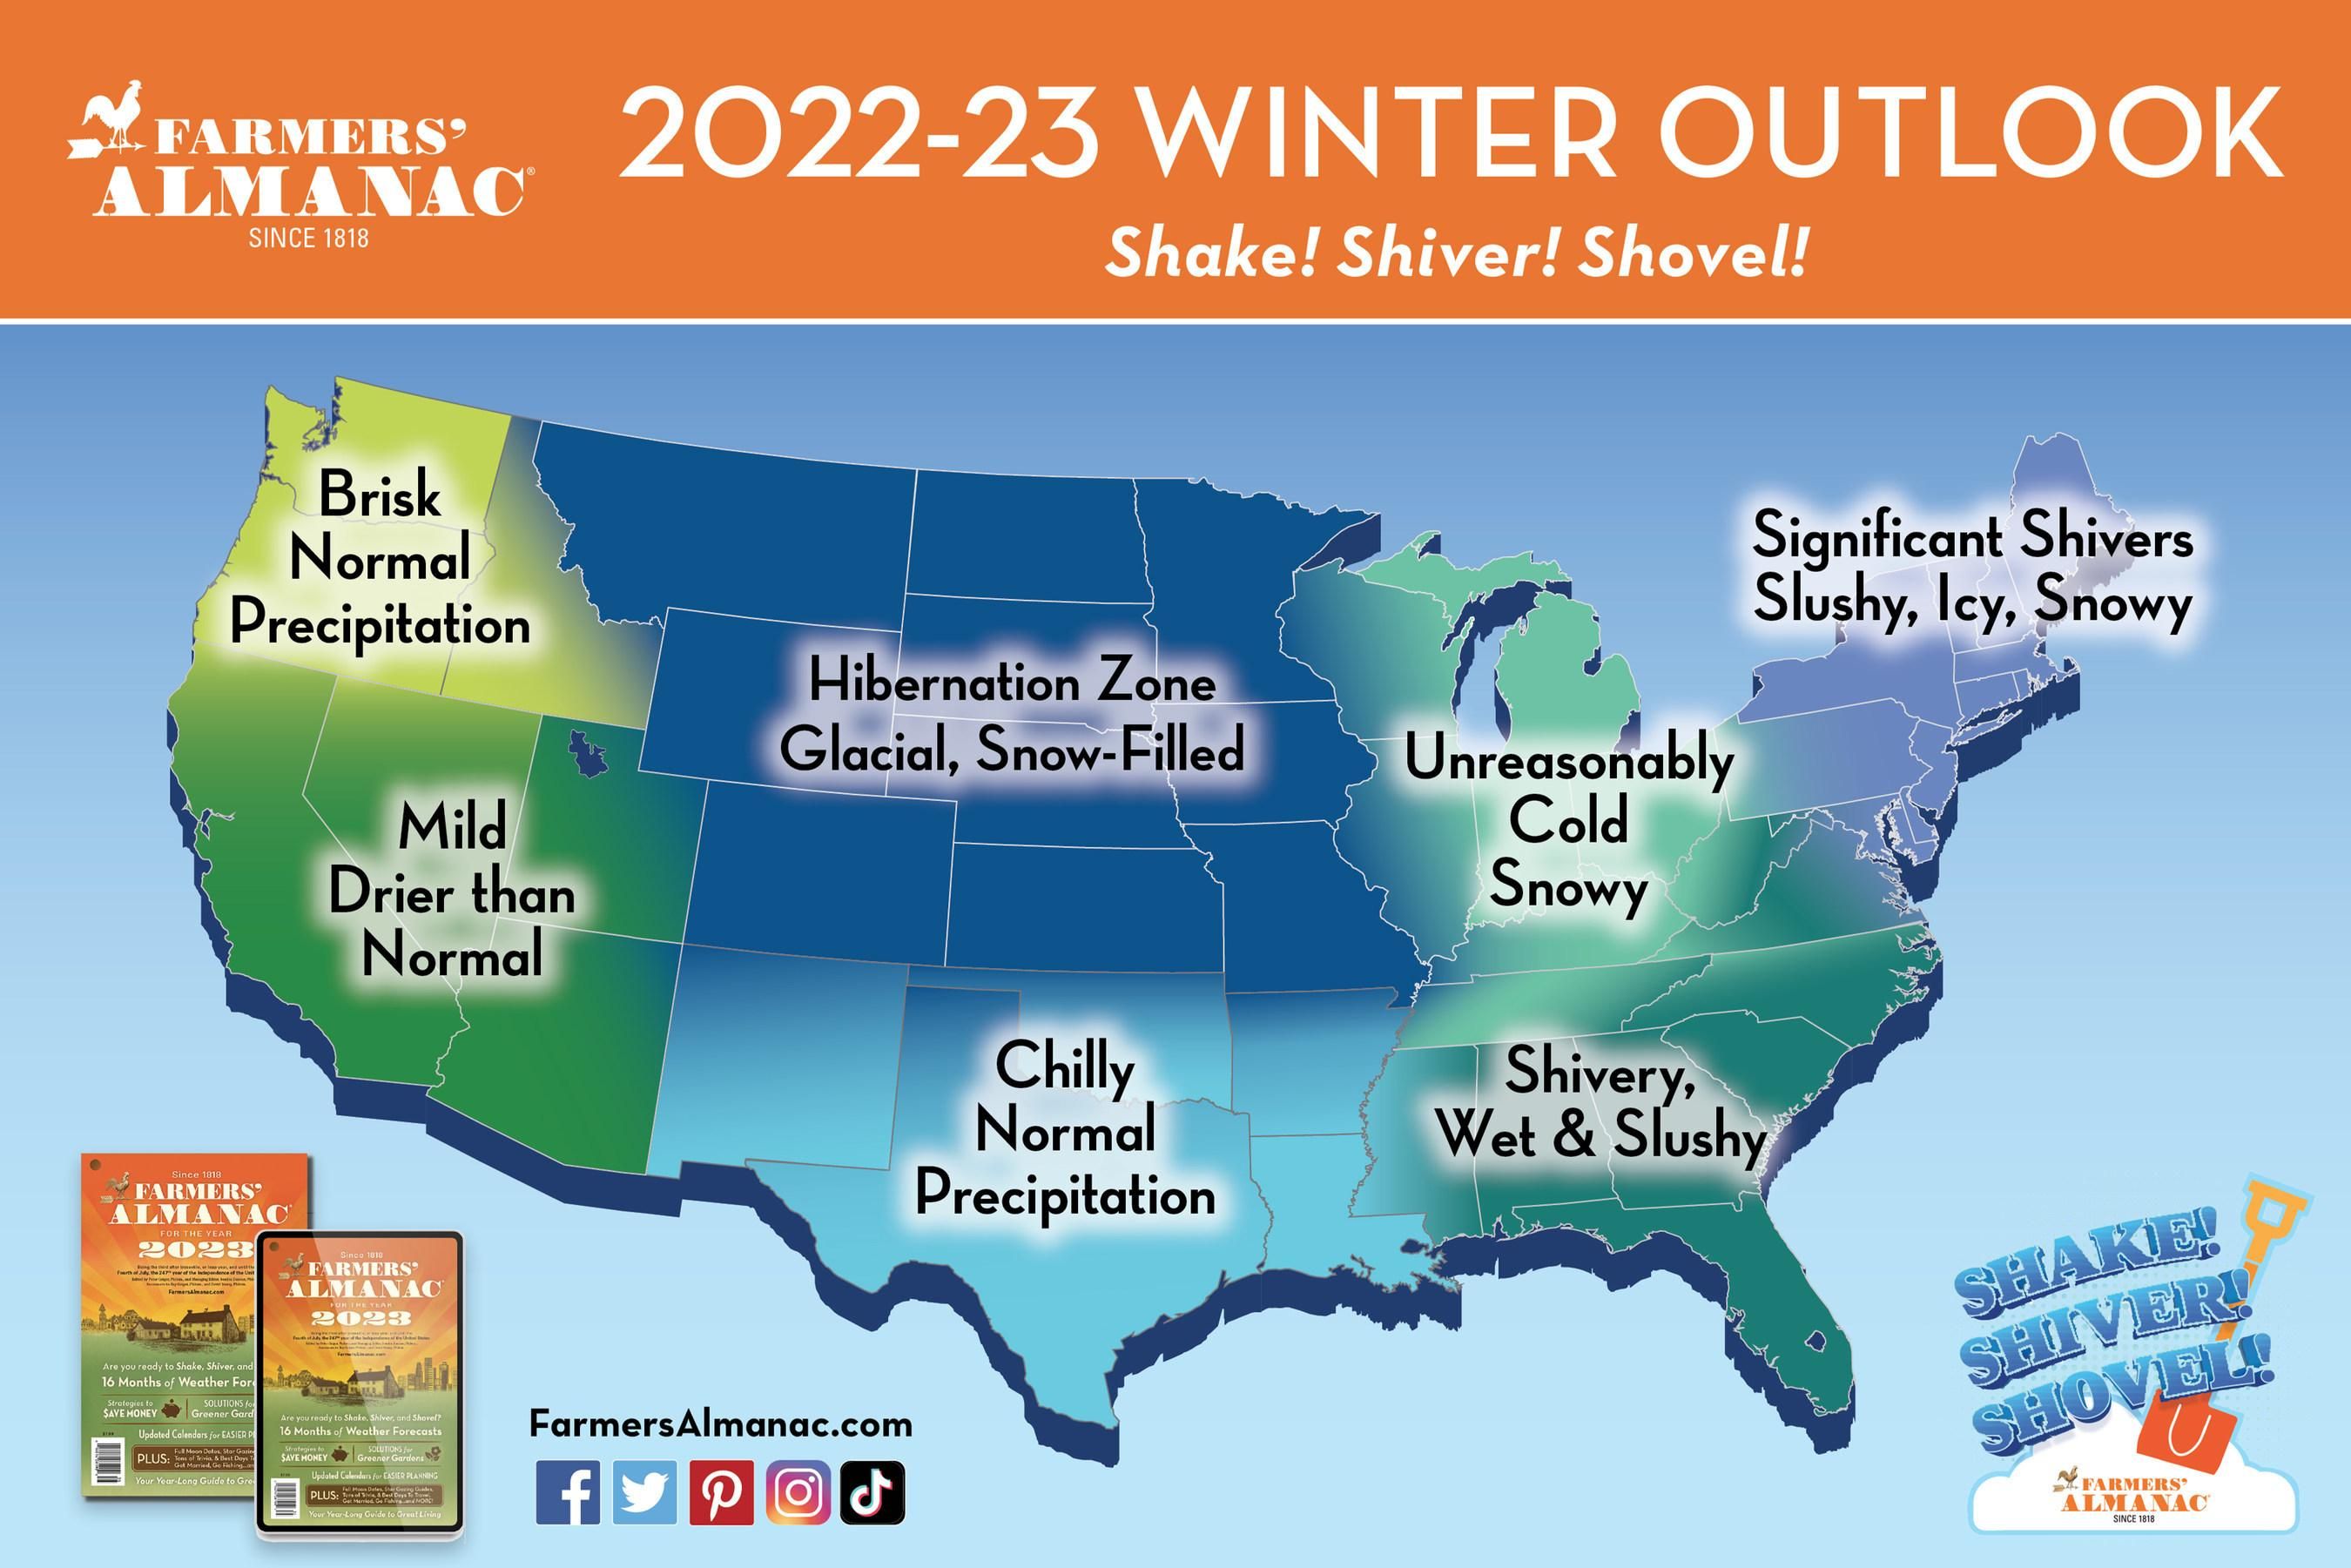 Map of the United States with regions designated for 2022 winter predictions. The Southeast is "Shivery, wet and slushy." Texas and surrounding states are "chilly, normal precipitation." Kentucky and parts of the Midwest are "unreasonably cold, snowy"